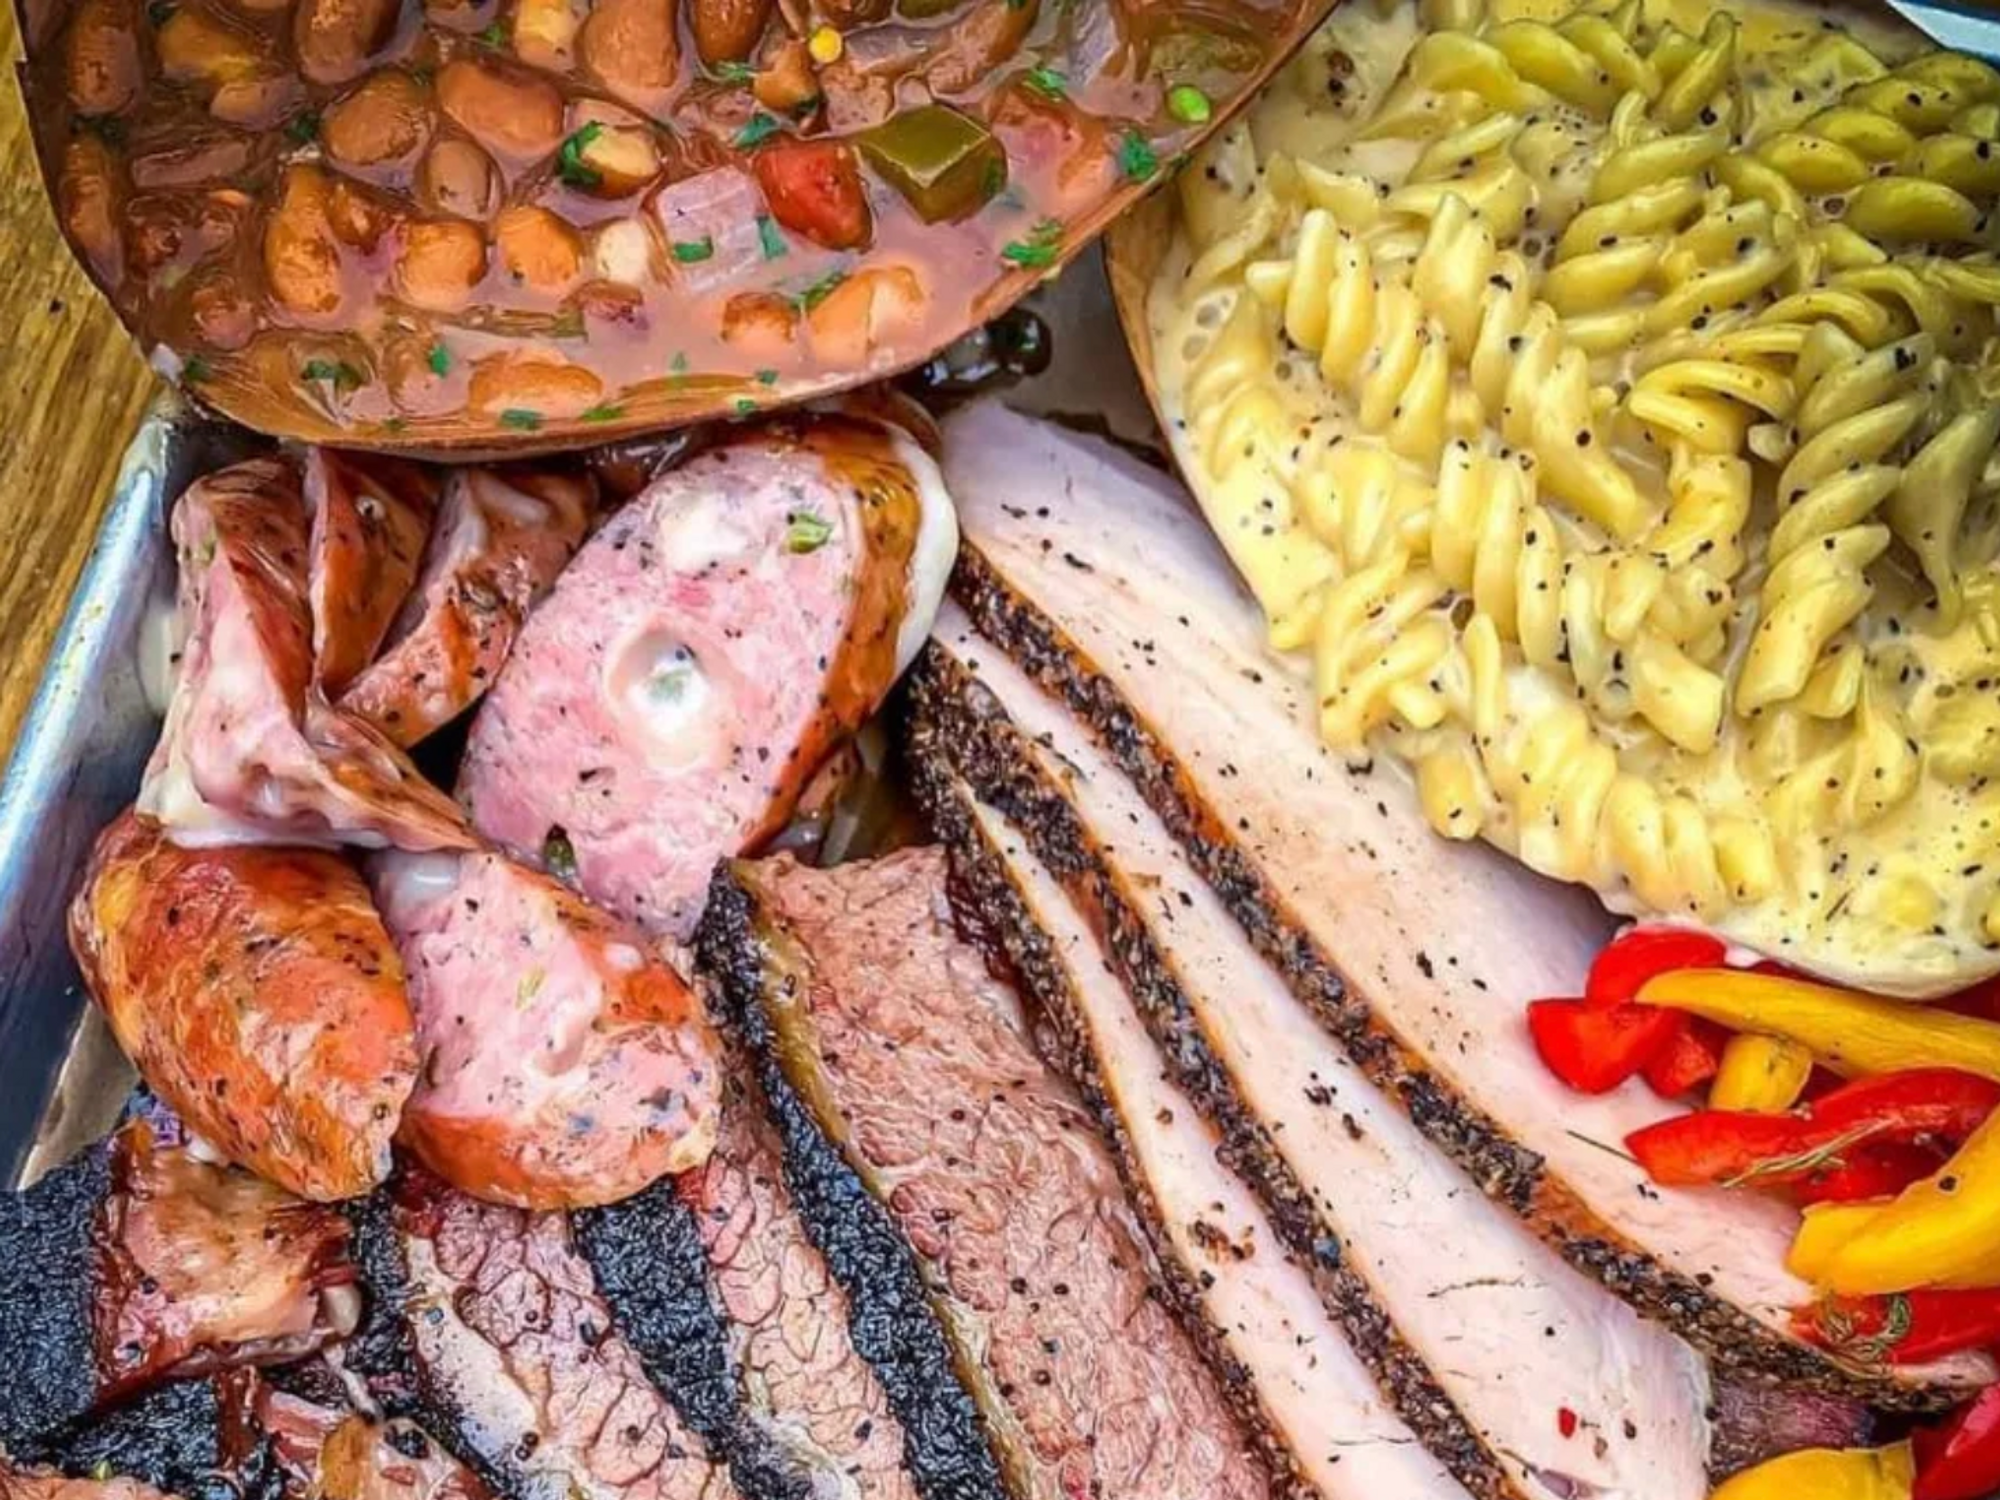 https://sanantonio.culturemap.com/media-library/2m-smokehouse-barbecue-and-sides.png?id=34242911&width=2000&height=1500&quality=85&coordinates=67%2C0%2C67%2C0